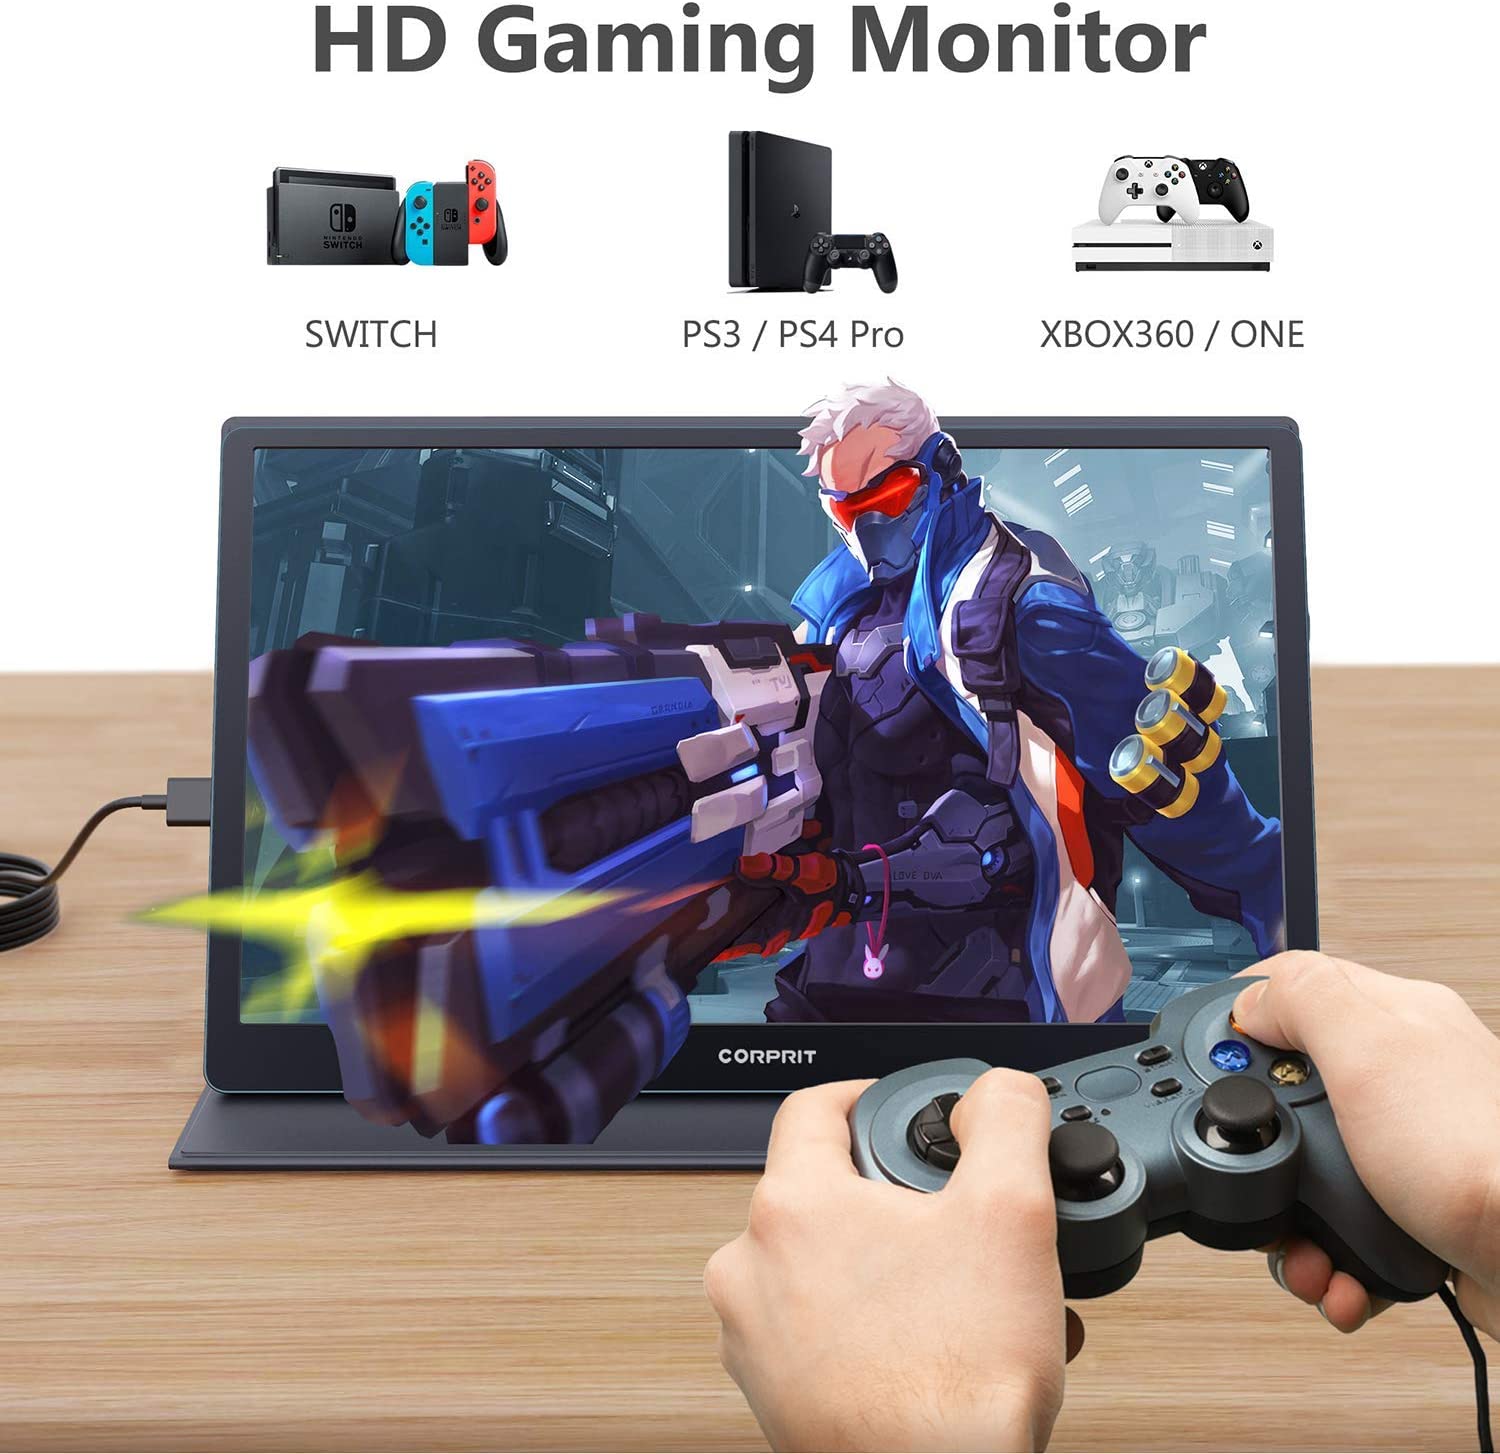 Corprit D157 USB 3.0 Portable Monitor,15.6" Gaming USB Second Screen 1080P FHD IPS (Out Of Stock In The US)